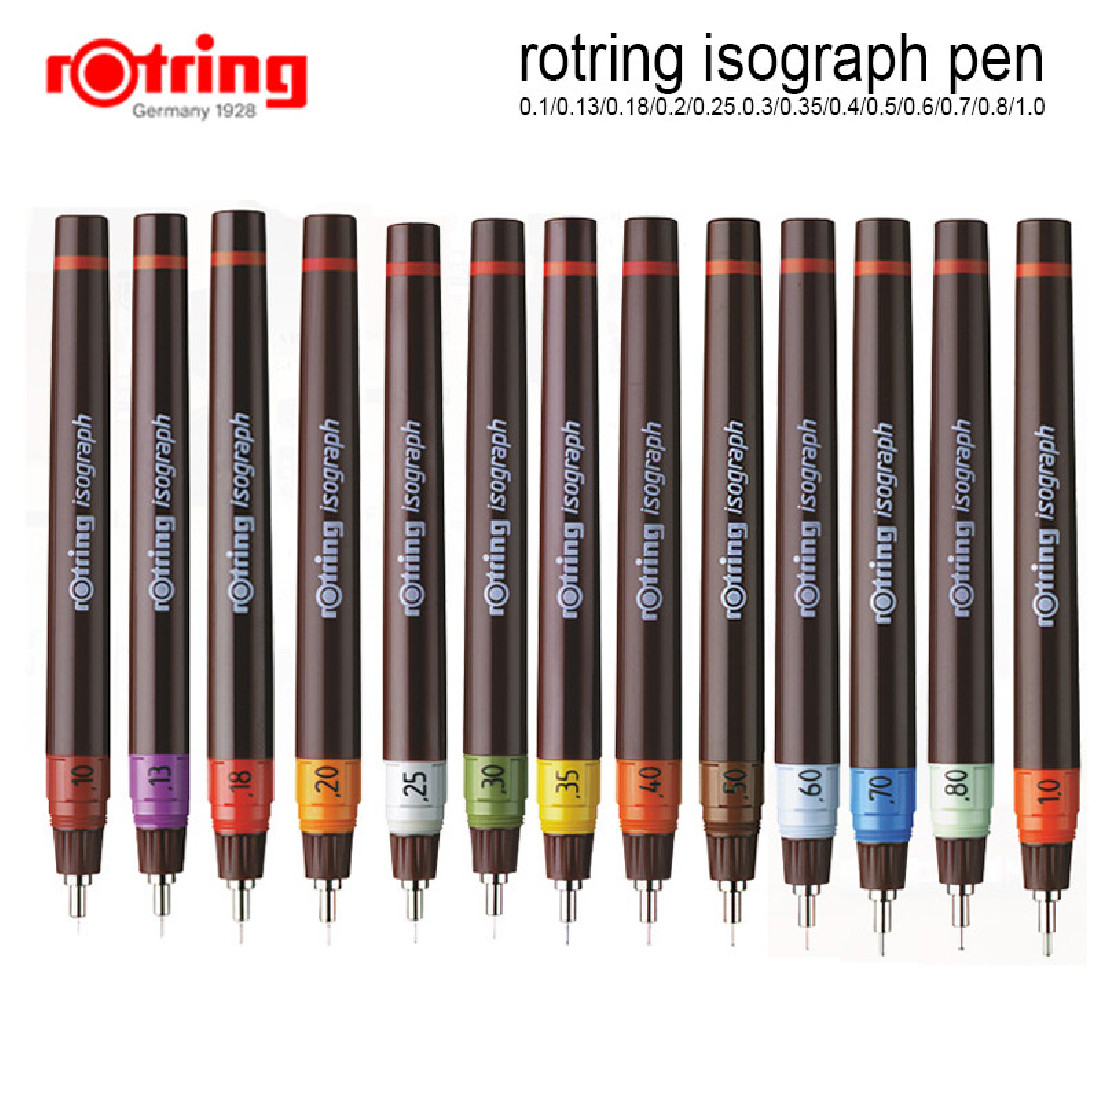 Rotring Isograph pen 0,8mm